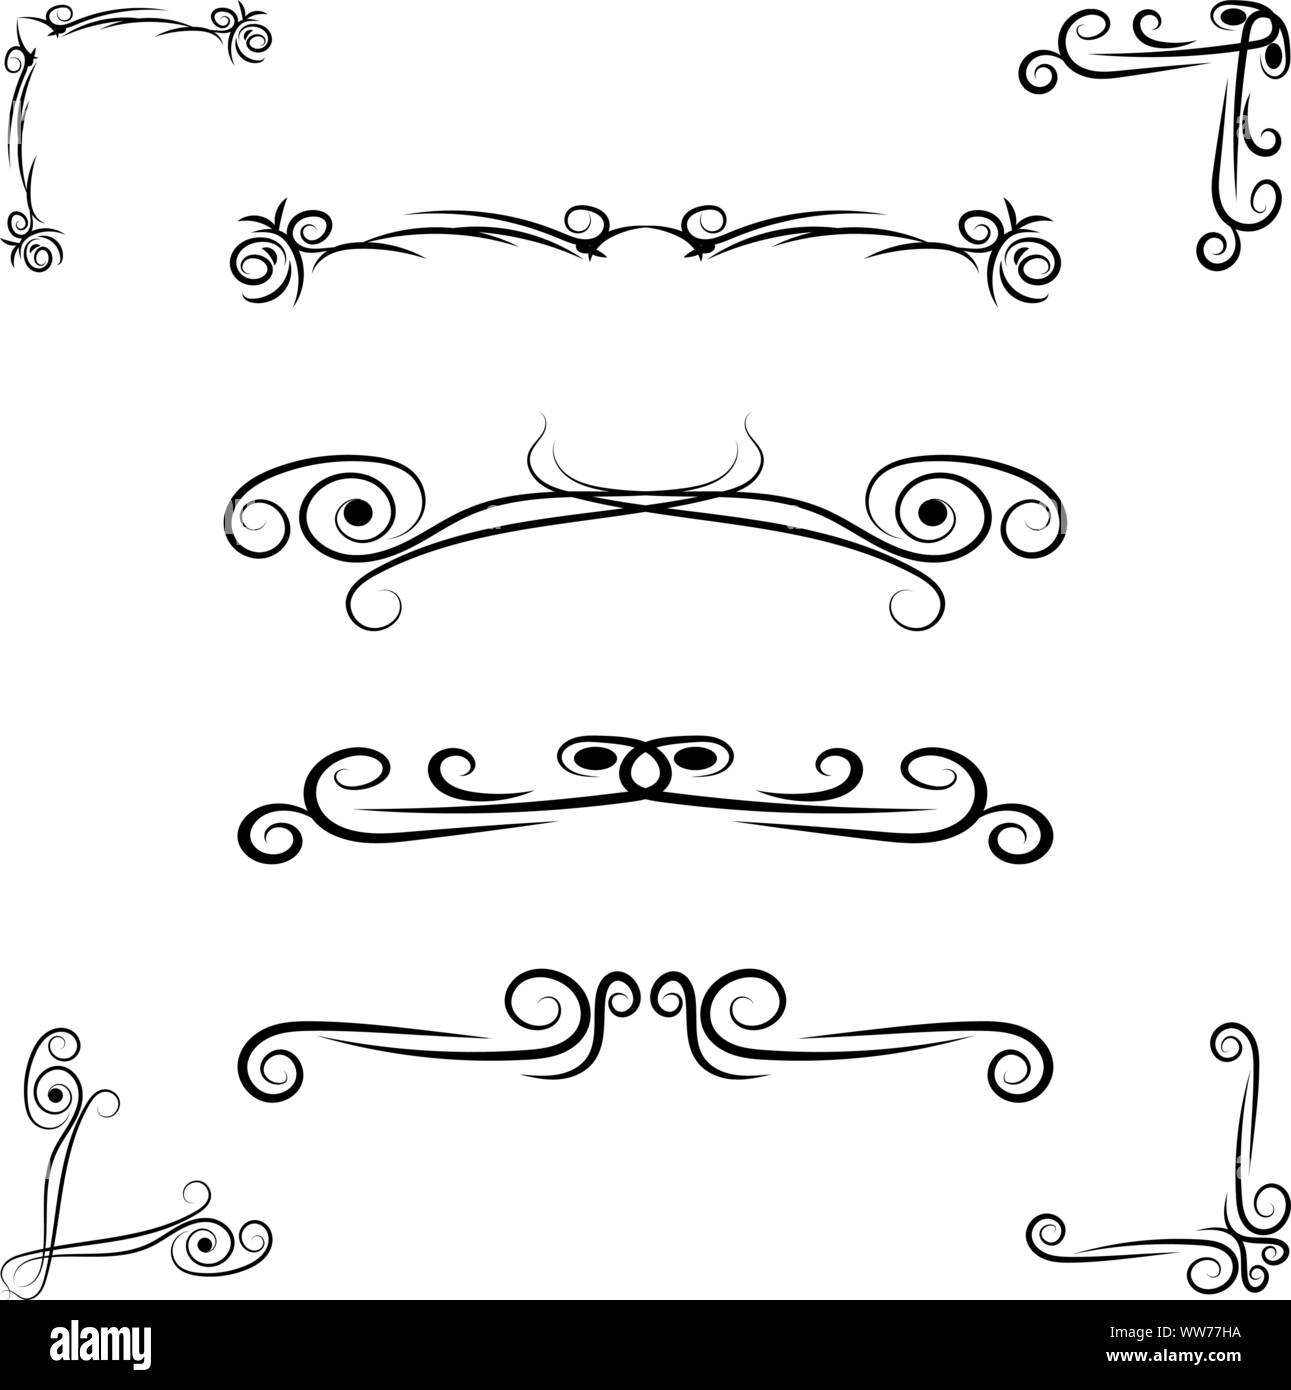 Hand drawn flourishes swirls, page dividers, border decor design elements ina vintage style Stock Vector